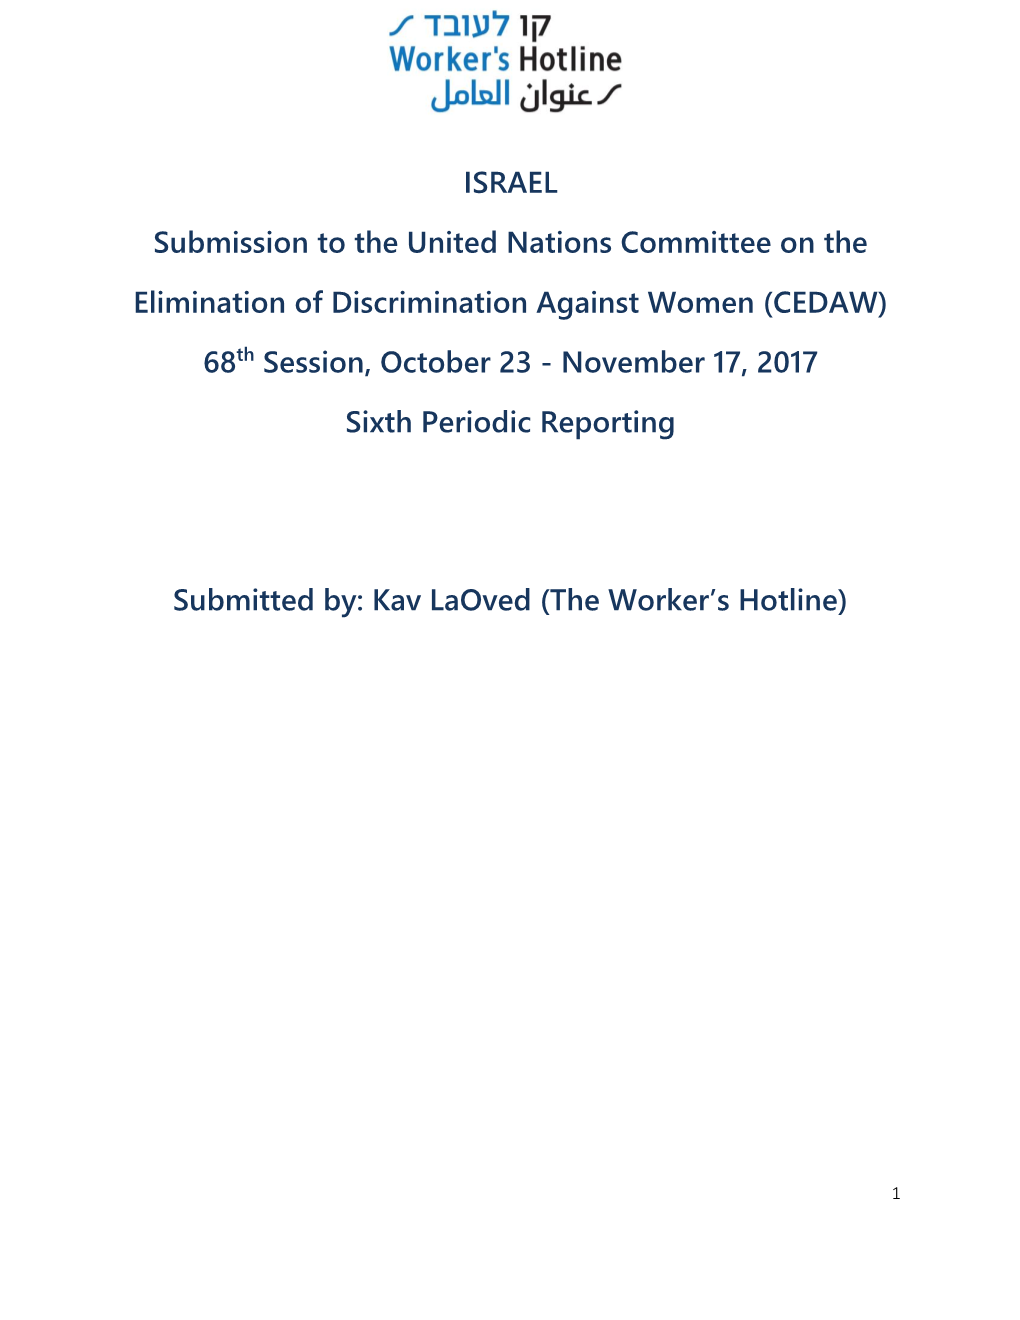 CEDAW) 68Th Session, October 23 - November 17, 2017 Sixth Periodic Reporting